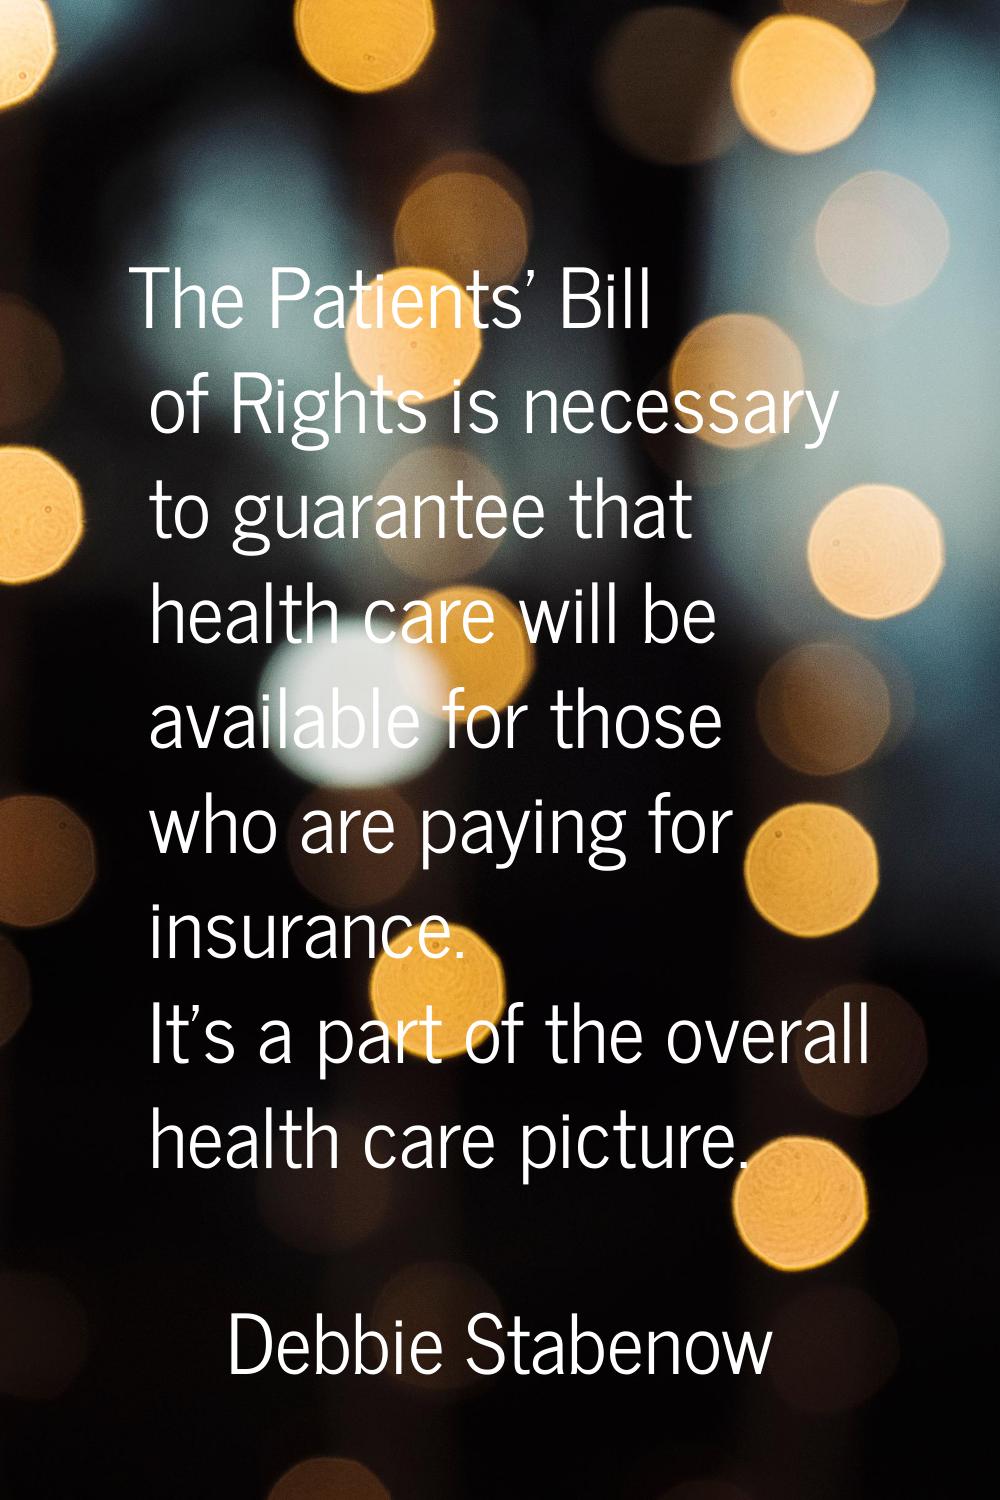 The Patients' Bill of Rights is necessary to guarantee that health care will be available for those